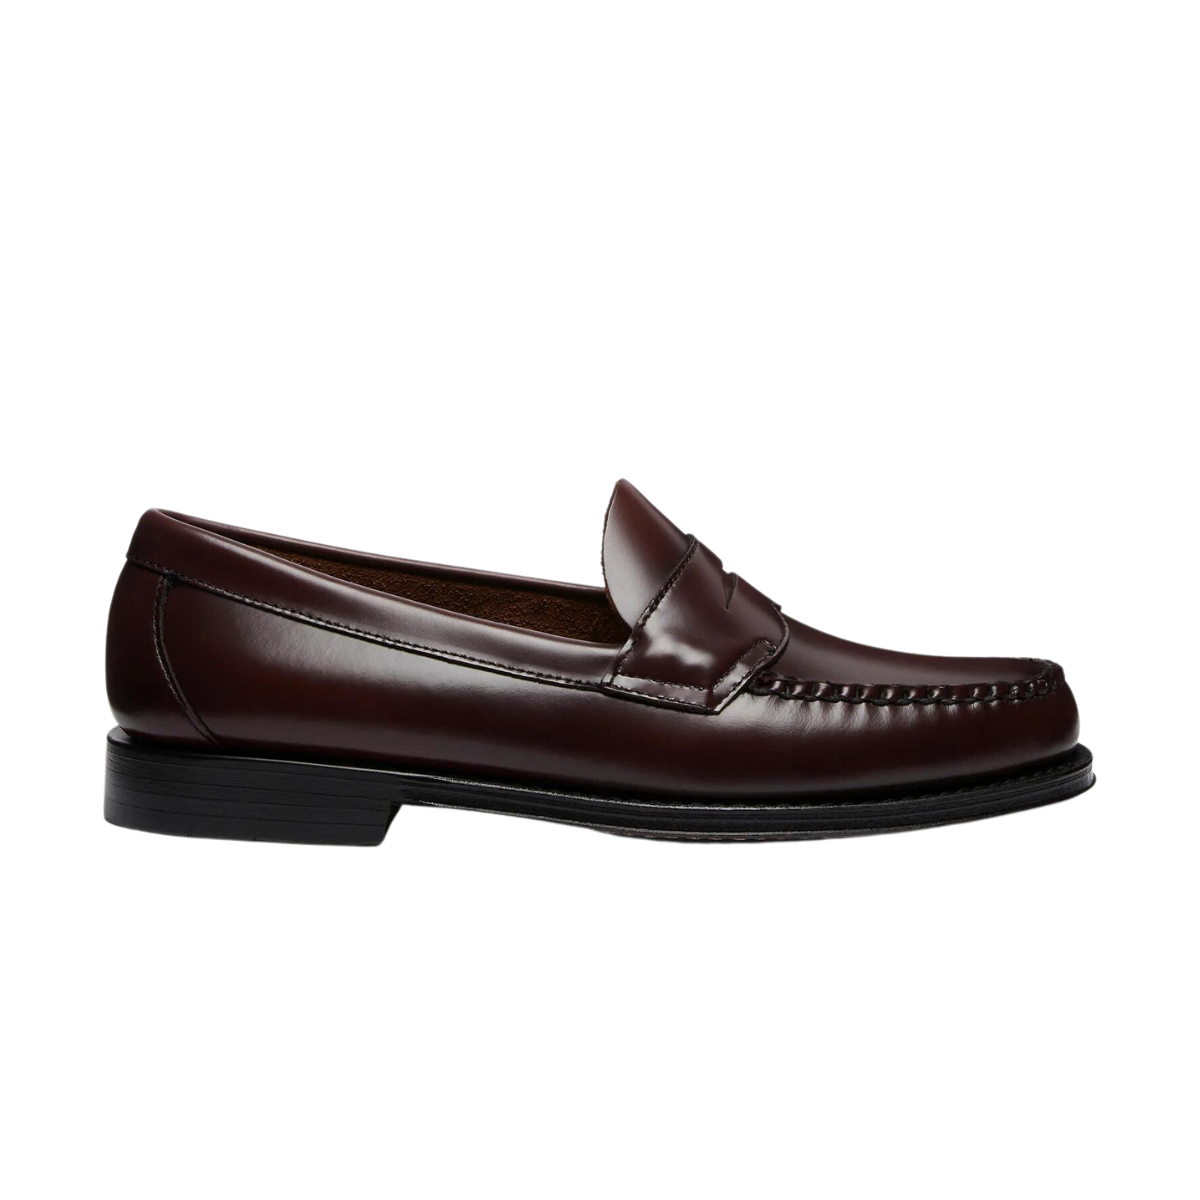 G.H. Bass & Co. | loafers for men - Logan Moc Leather | Wine | kapok